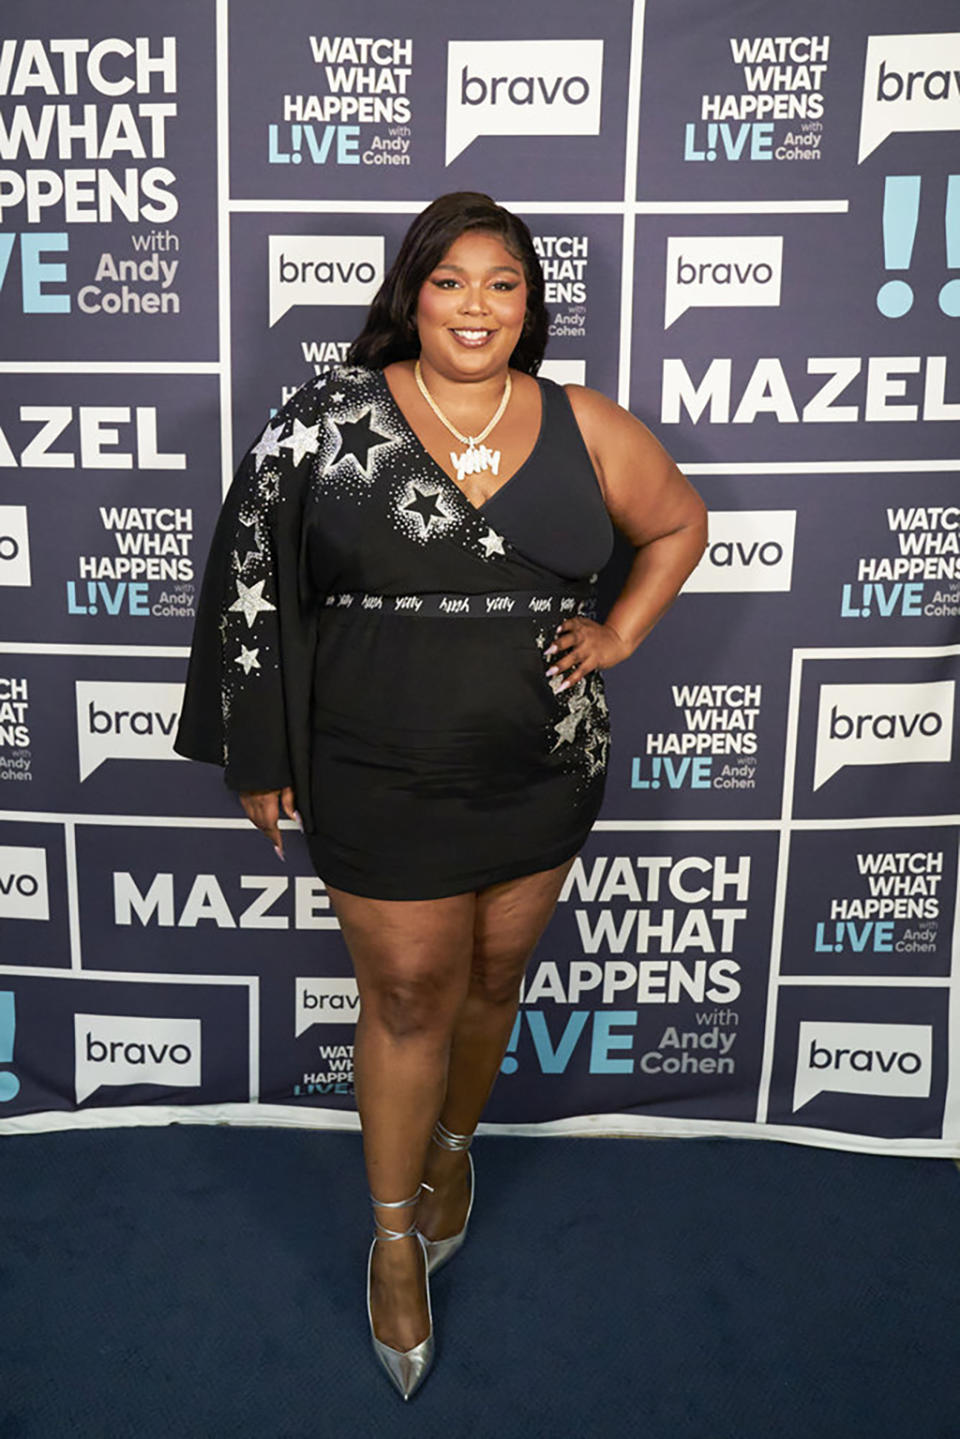 WATCH WHAT HAPPENS LIVE WITH ANDY COHEN — Episode 19118 — Pictured: Lizzo — (Photo by: Michael Greenberg/Bravo) - Credit: Michael Greenberg/Bravo